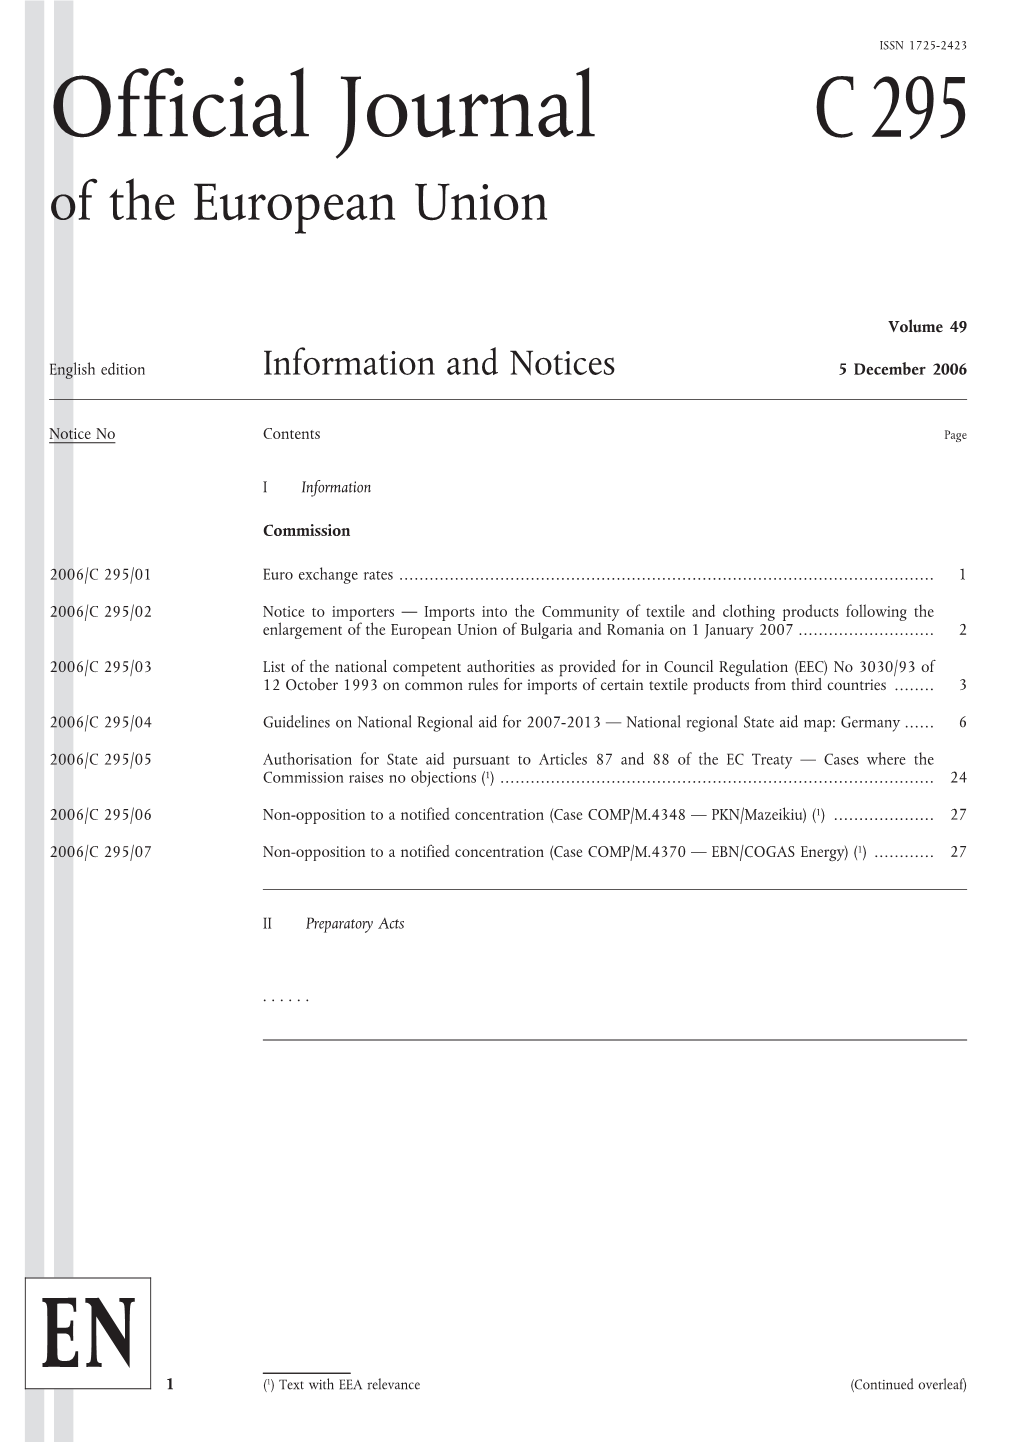 Official Journal C295 of the European Union